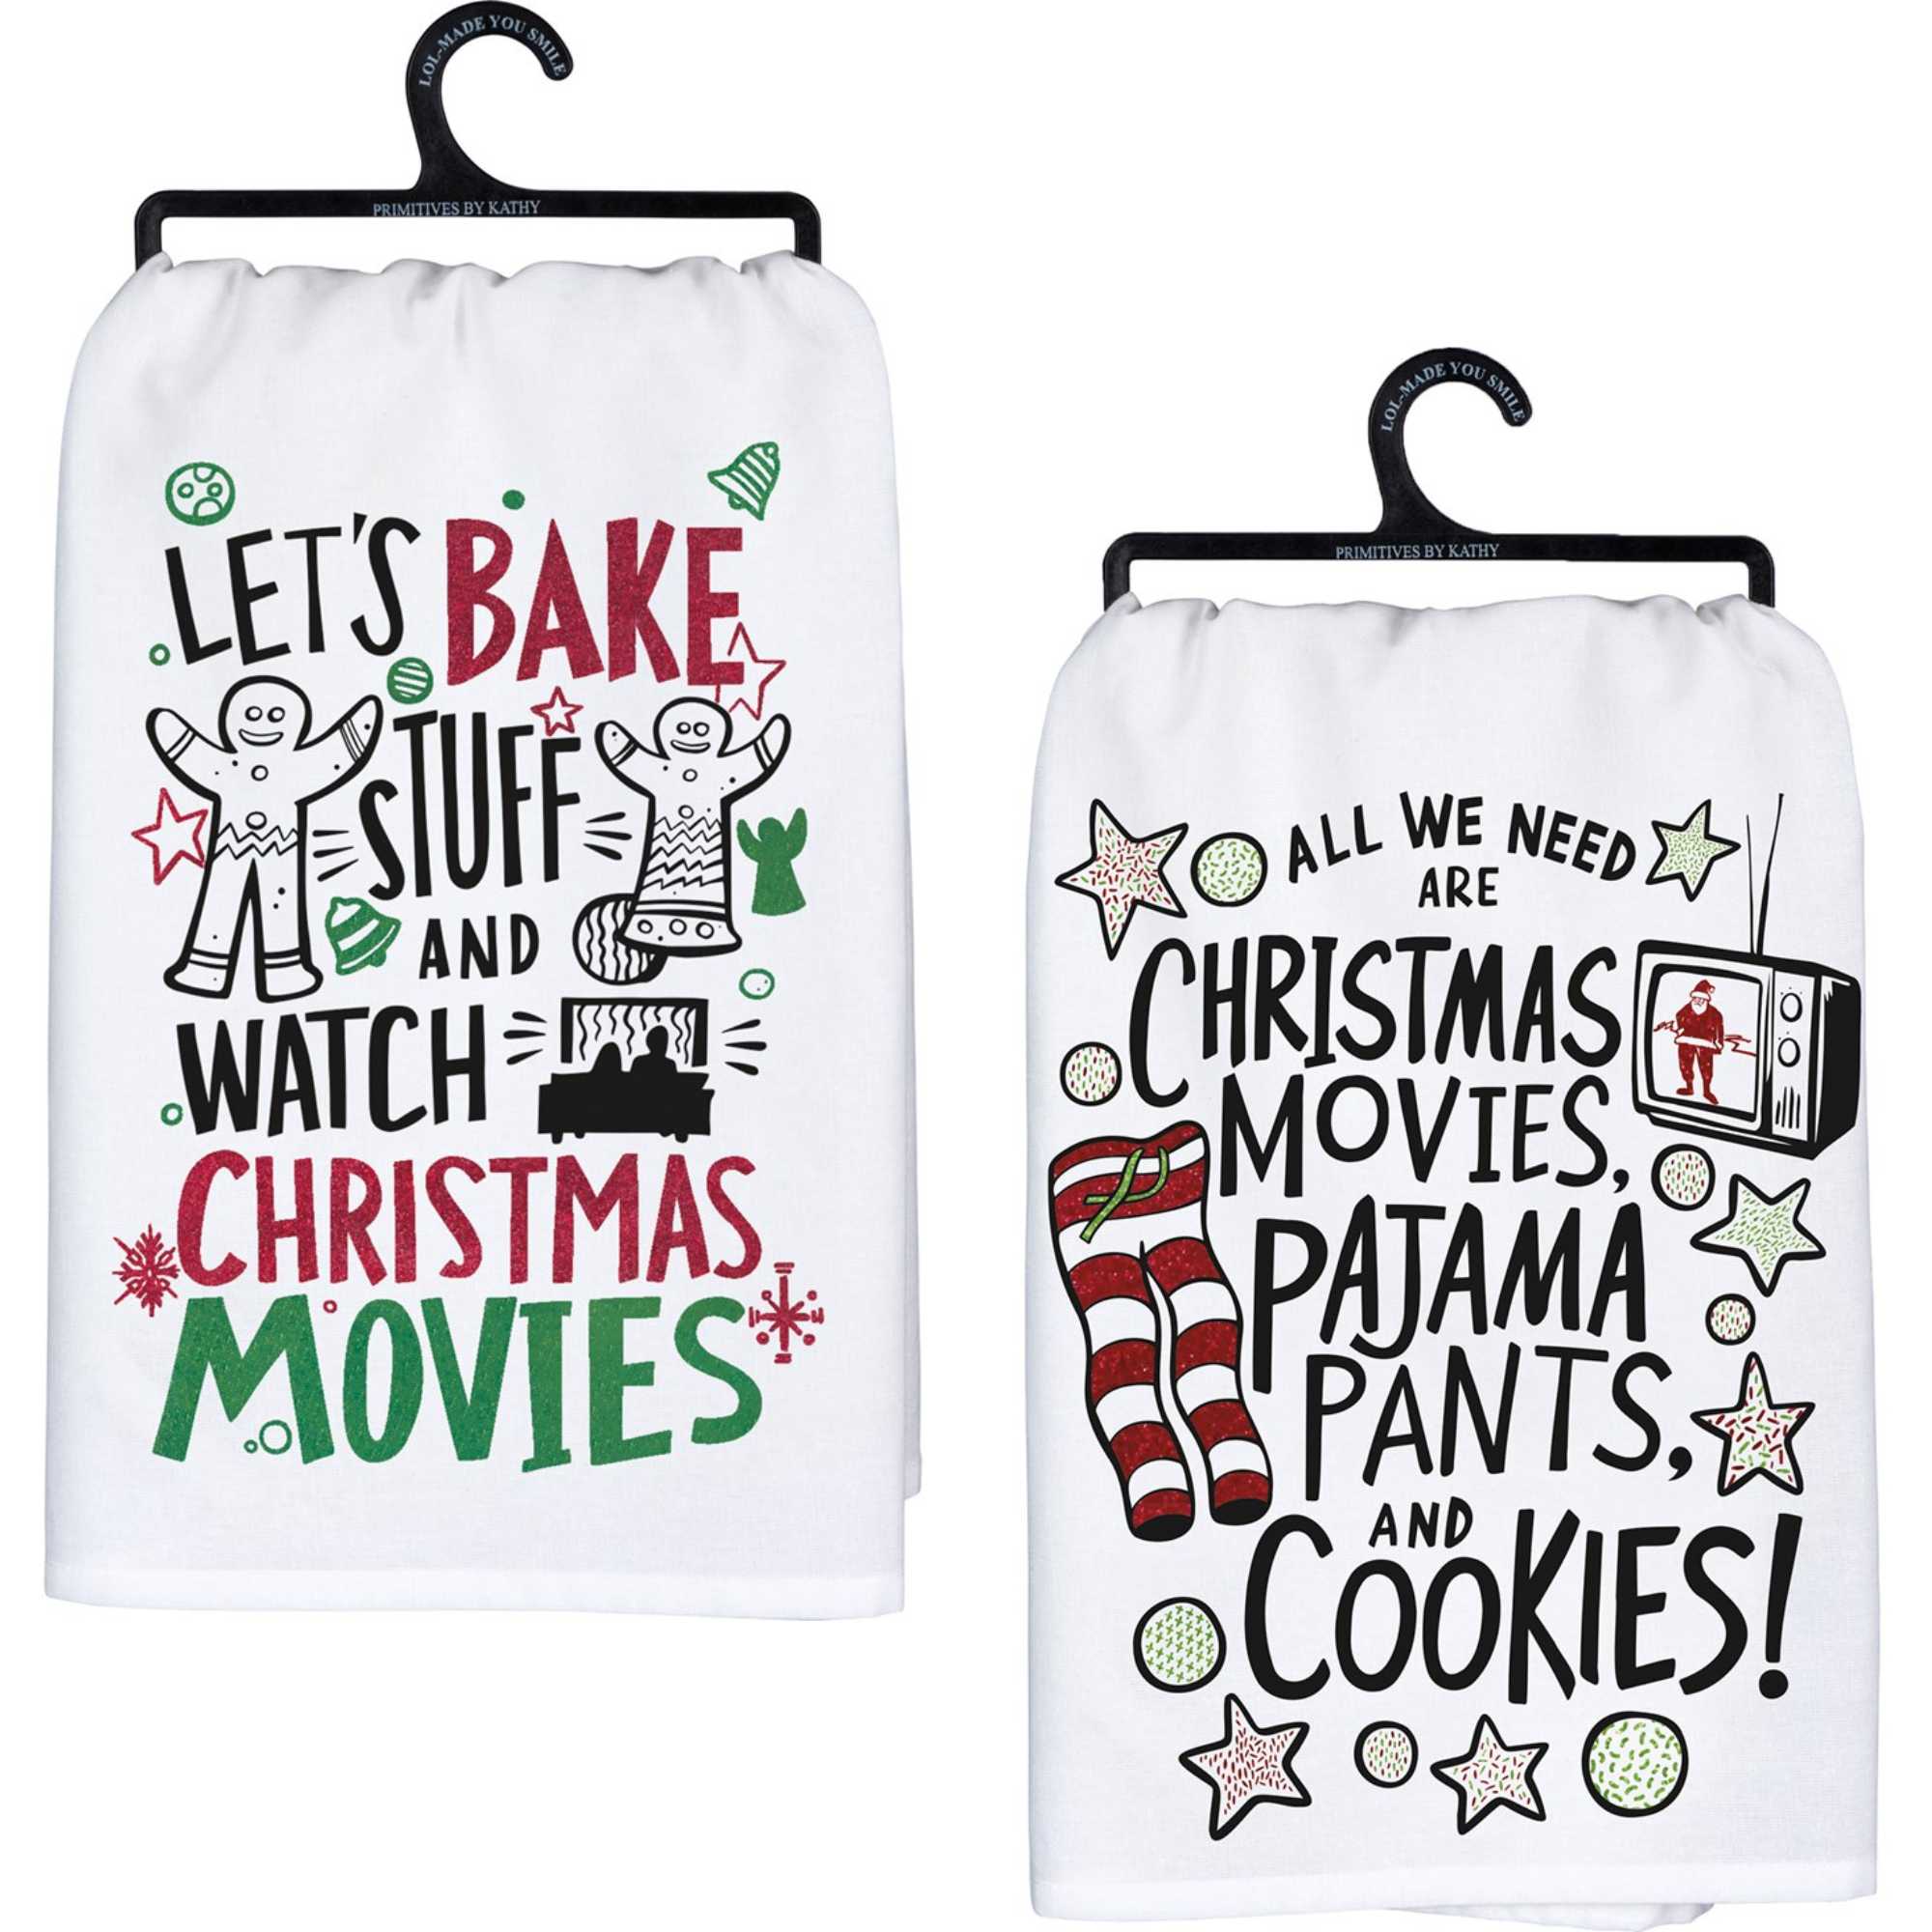 Primitives by Kathy Believe in The Magic of Christmas Dish Towel